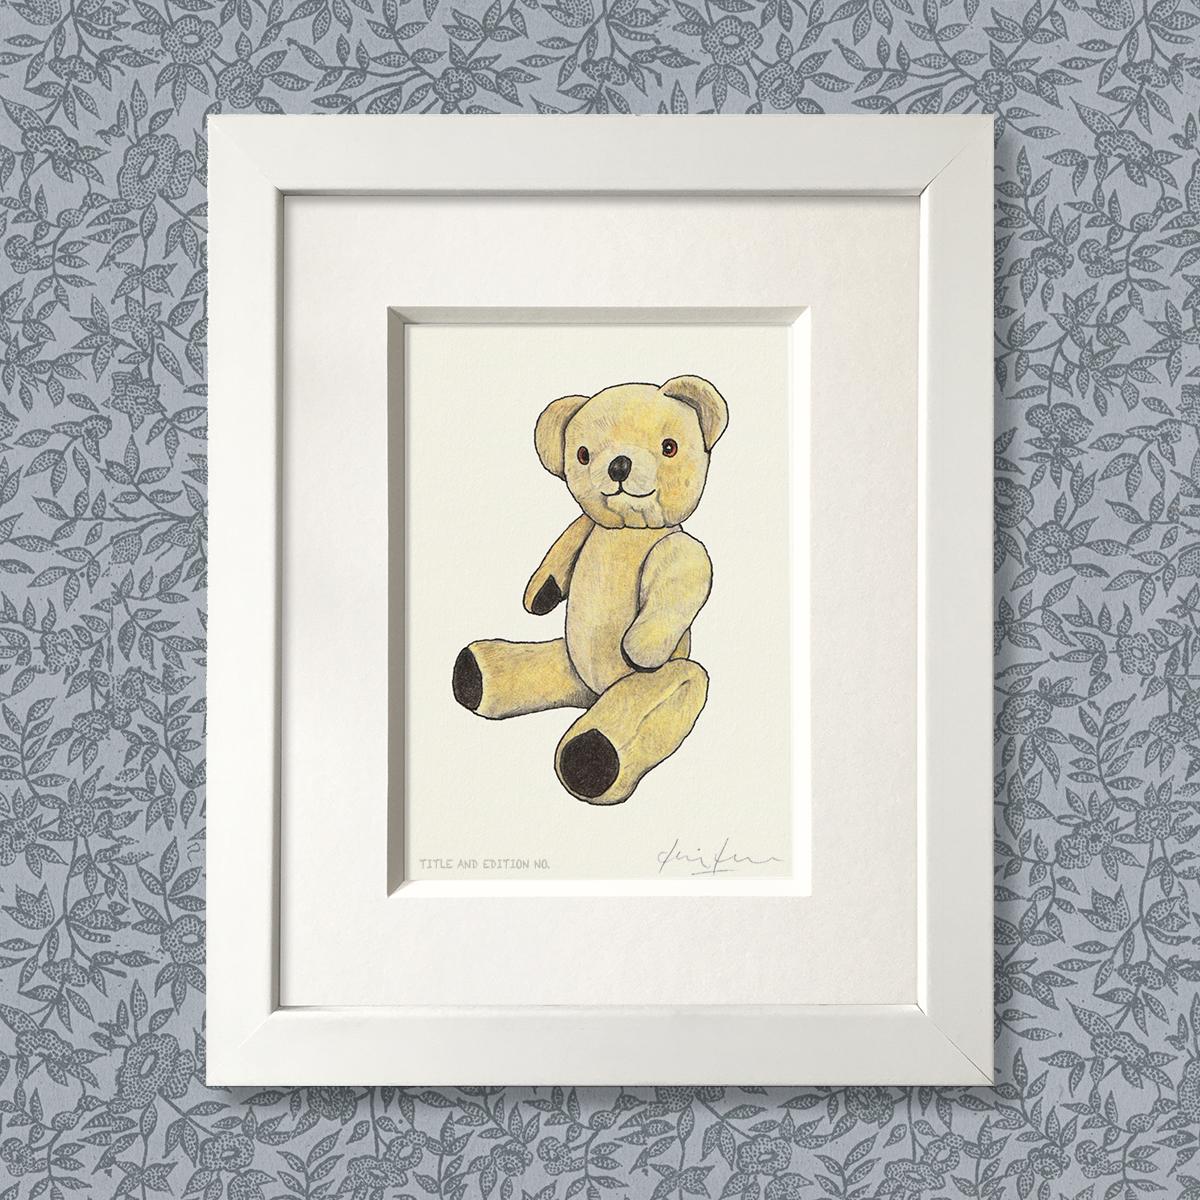 Limited edition print from a pen, ink and coloured pencil drawing of a Teddy Bear in a white frame